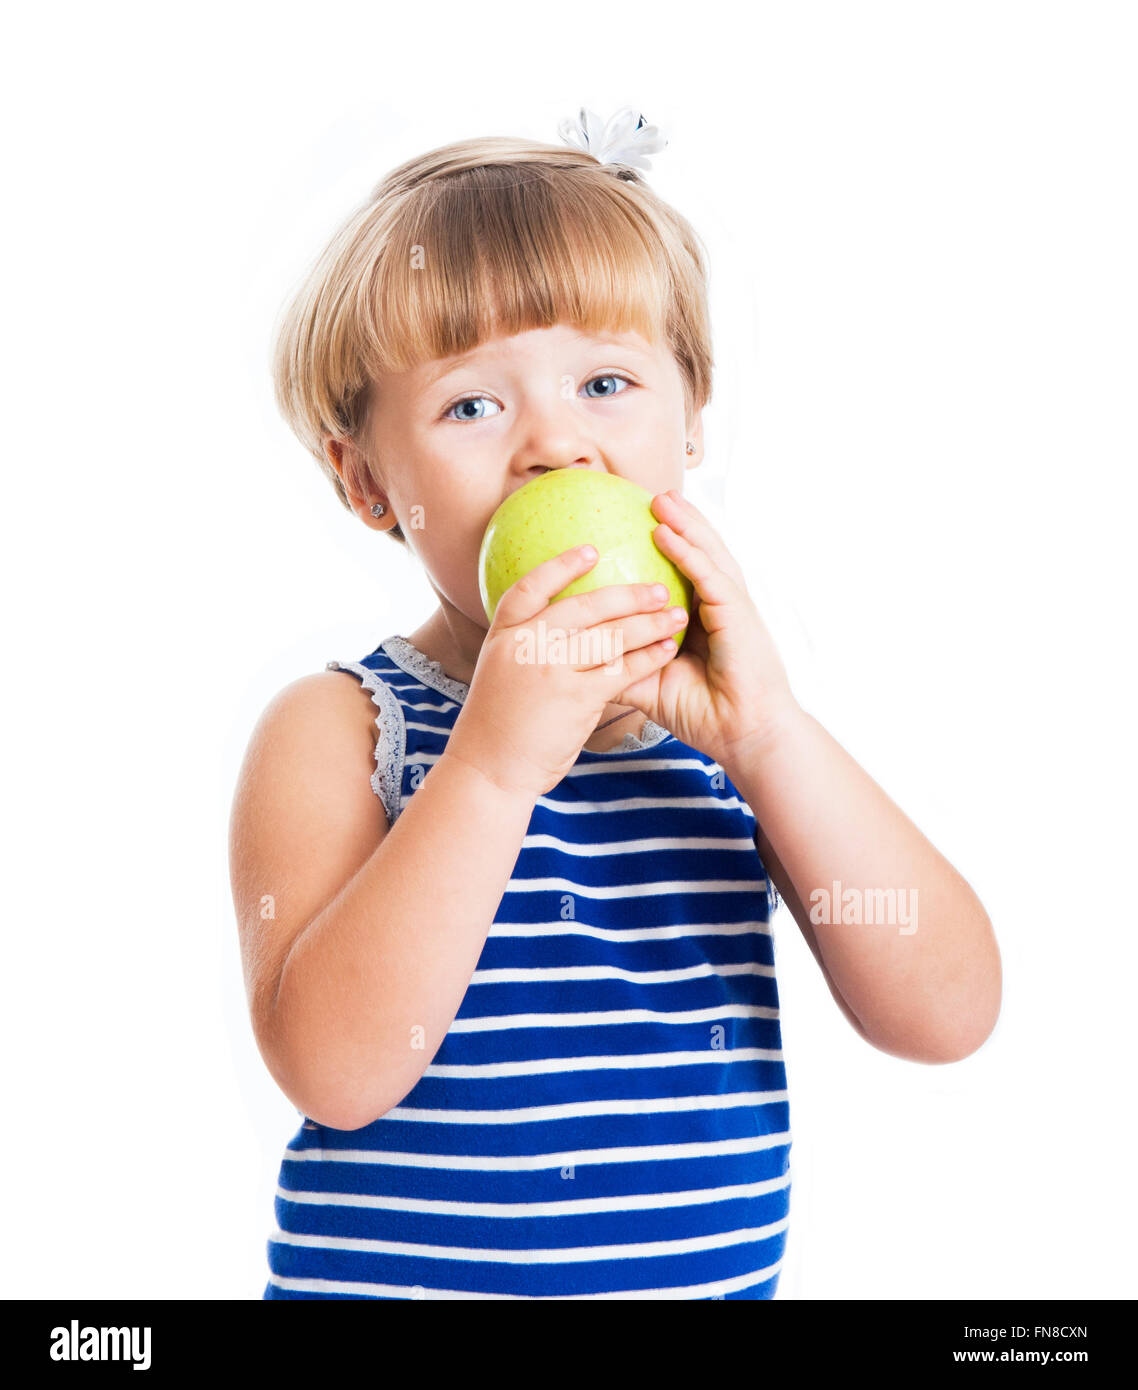 Sweet Girl eating an apple Banque D'Images